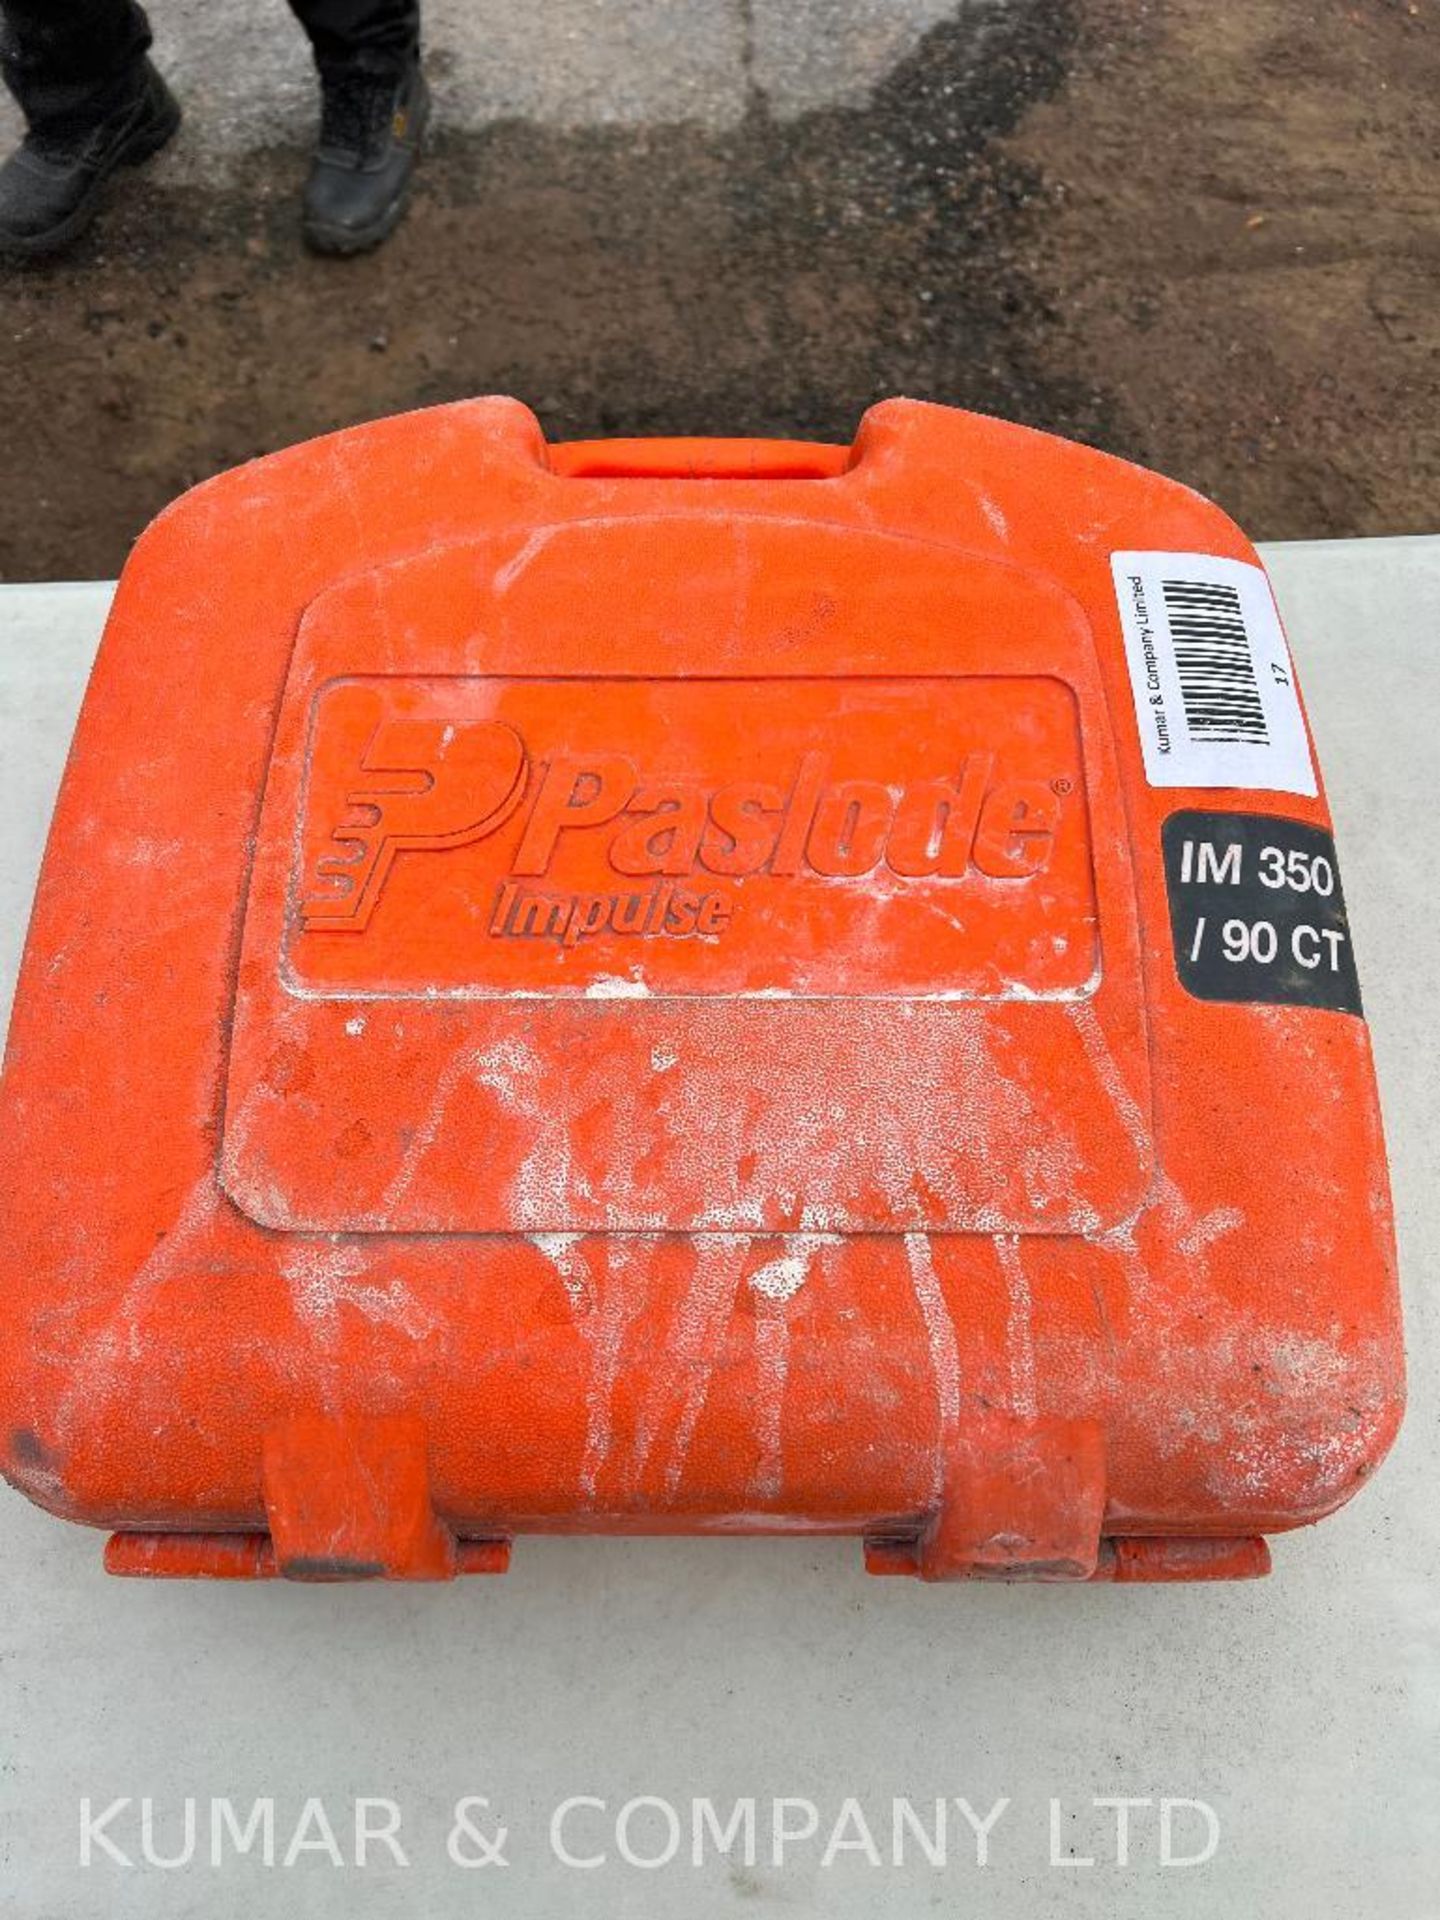 Paslode Impulse IM 350/90 CT Nail Gun in Box as Shown. Part No: 085000 PLEASE NOTE: THIS LOT IS LOCA